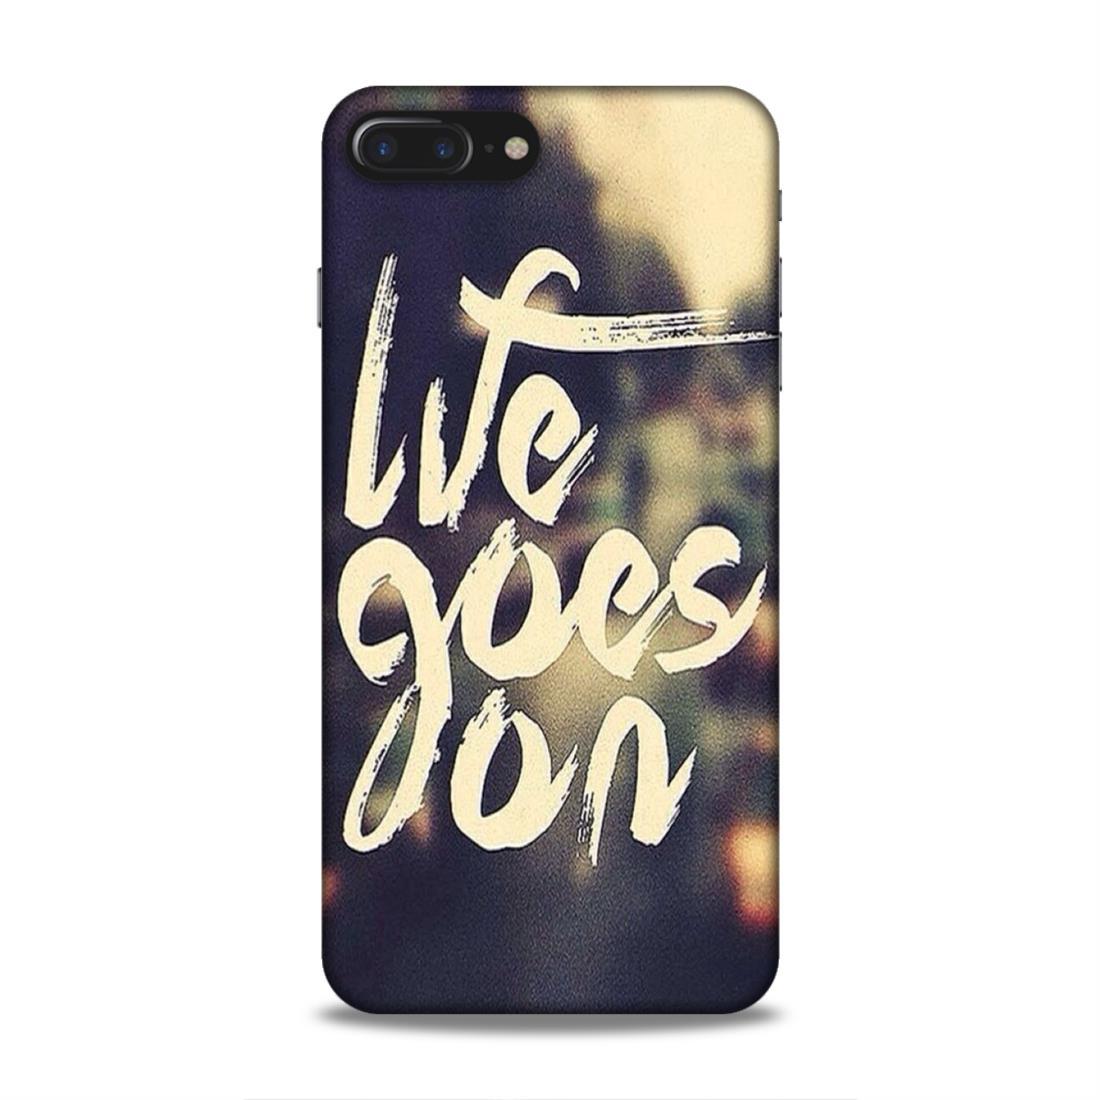 Life Goes On iPhone 8 Plus Mobile Cover Case